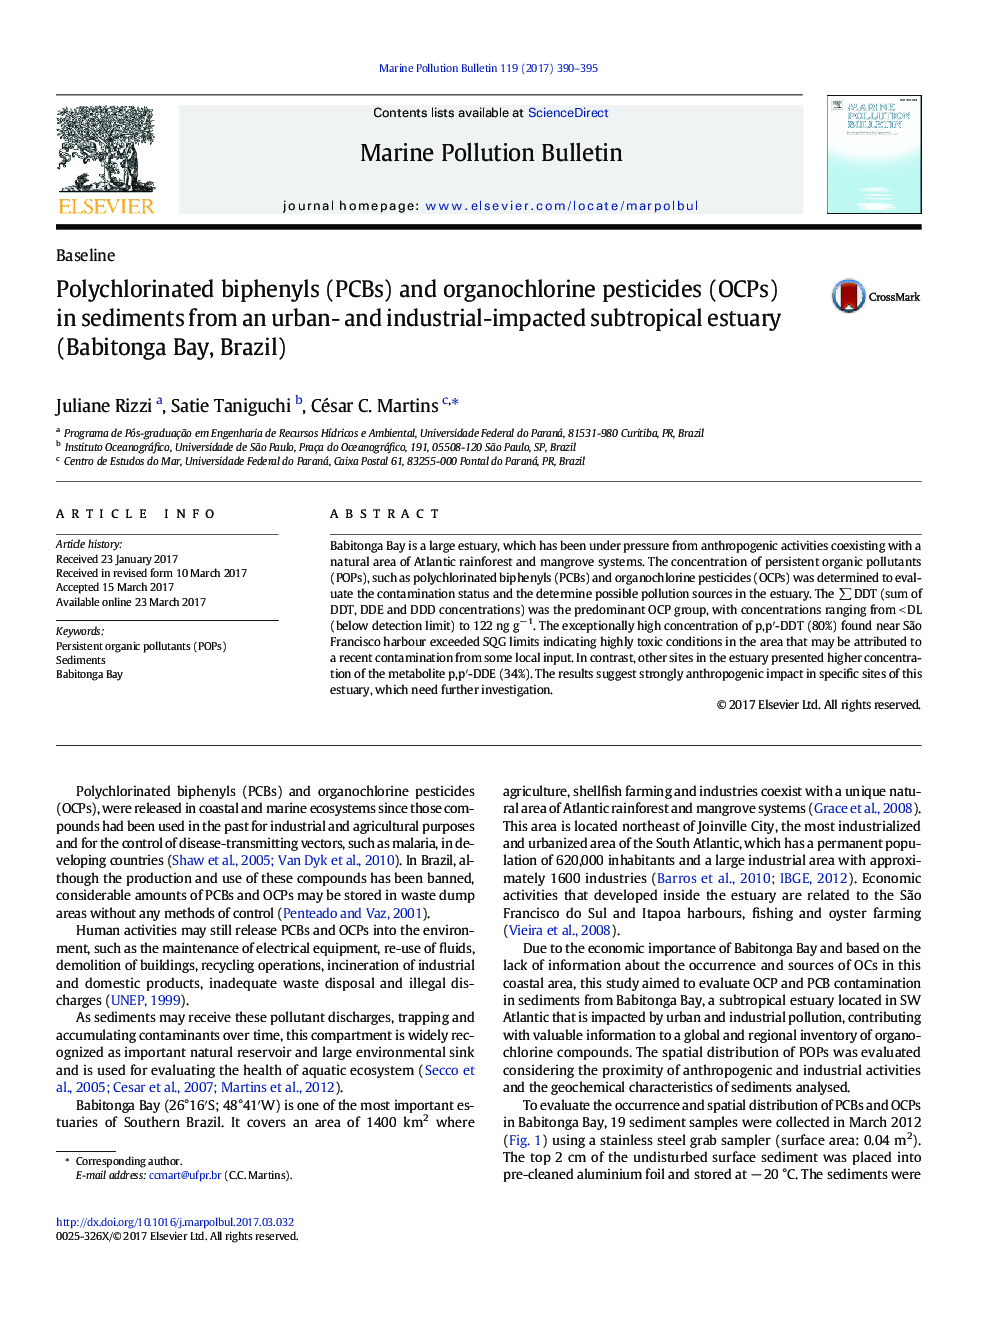 BaselinePolychlorinated biphenyls (PCBs) and organochlorine pesticides (OCPs) in sediments from an urban- and industrial-impacted subtropical estuary (Babitonga Bay, Brazil)